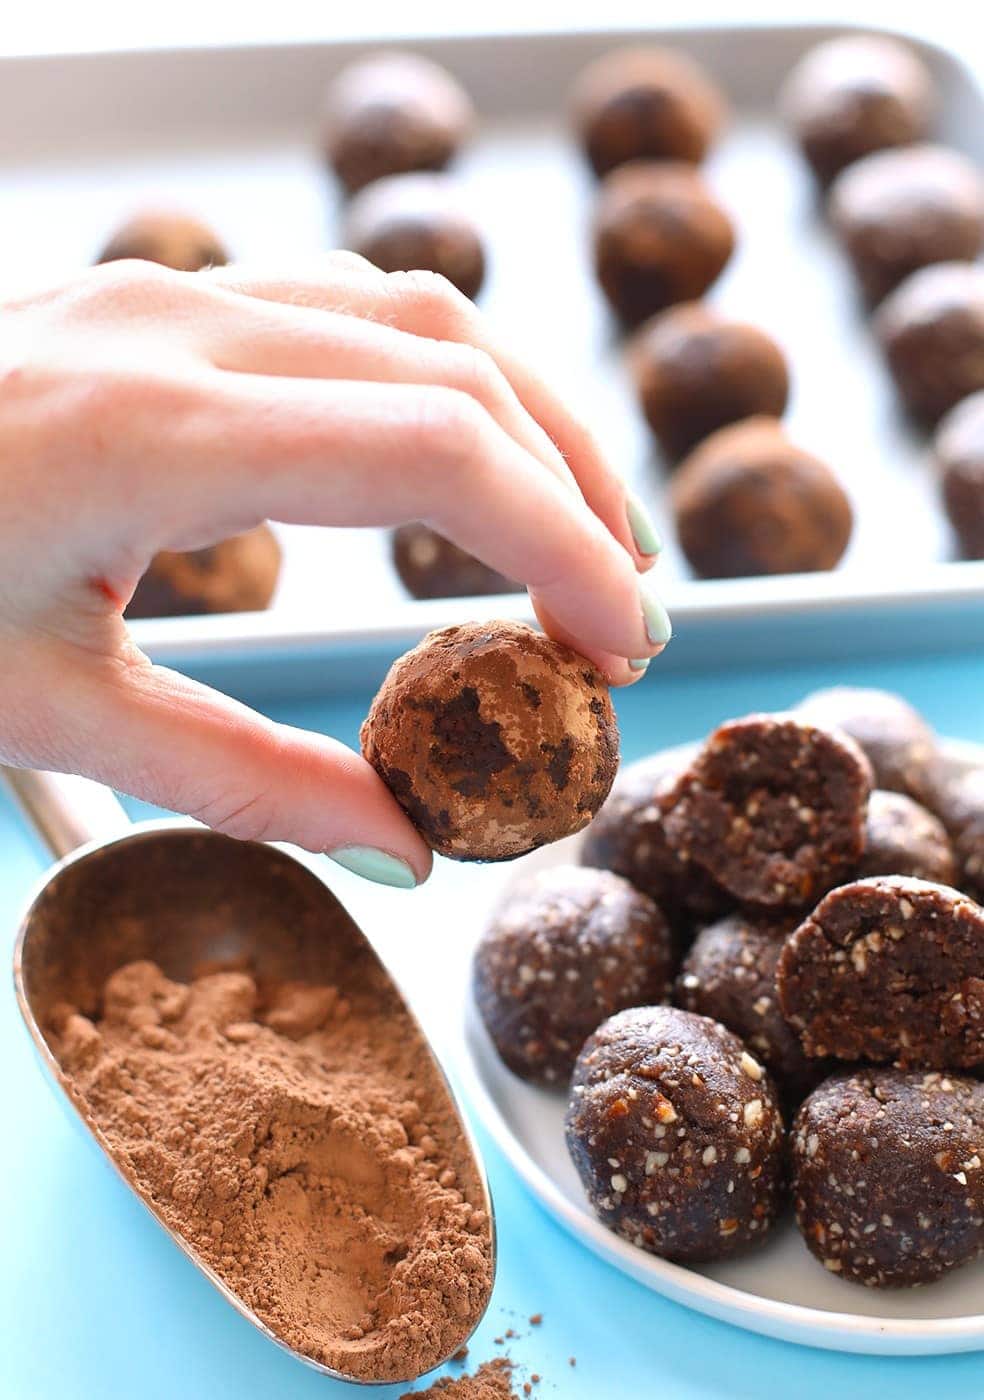 These healthy peanut butter brownie balls are the energy ball of all energy balls. They're packed with protein and fiber and pretty much taste like dessert!